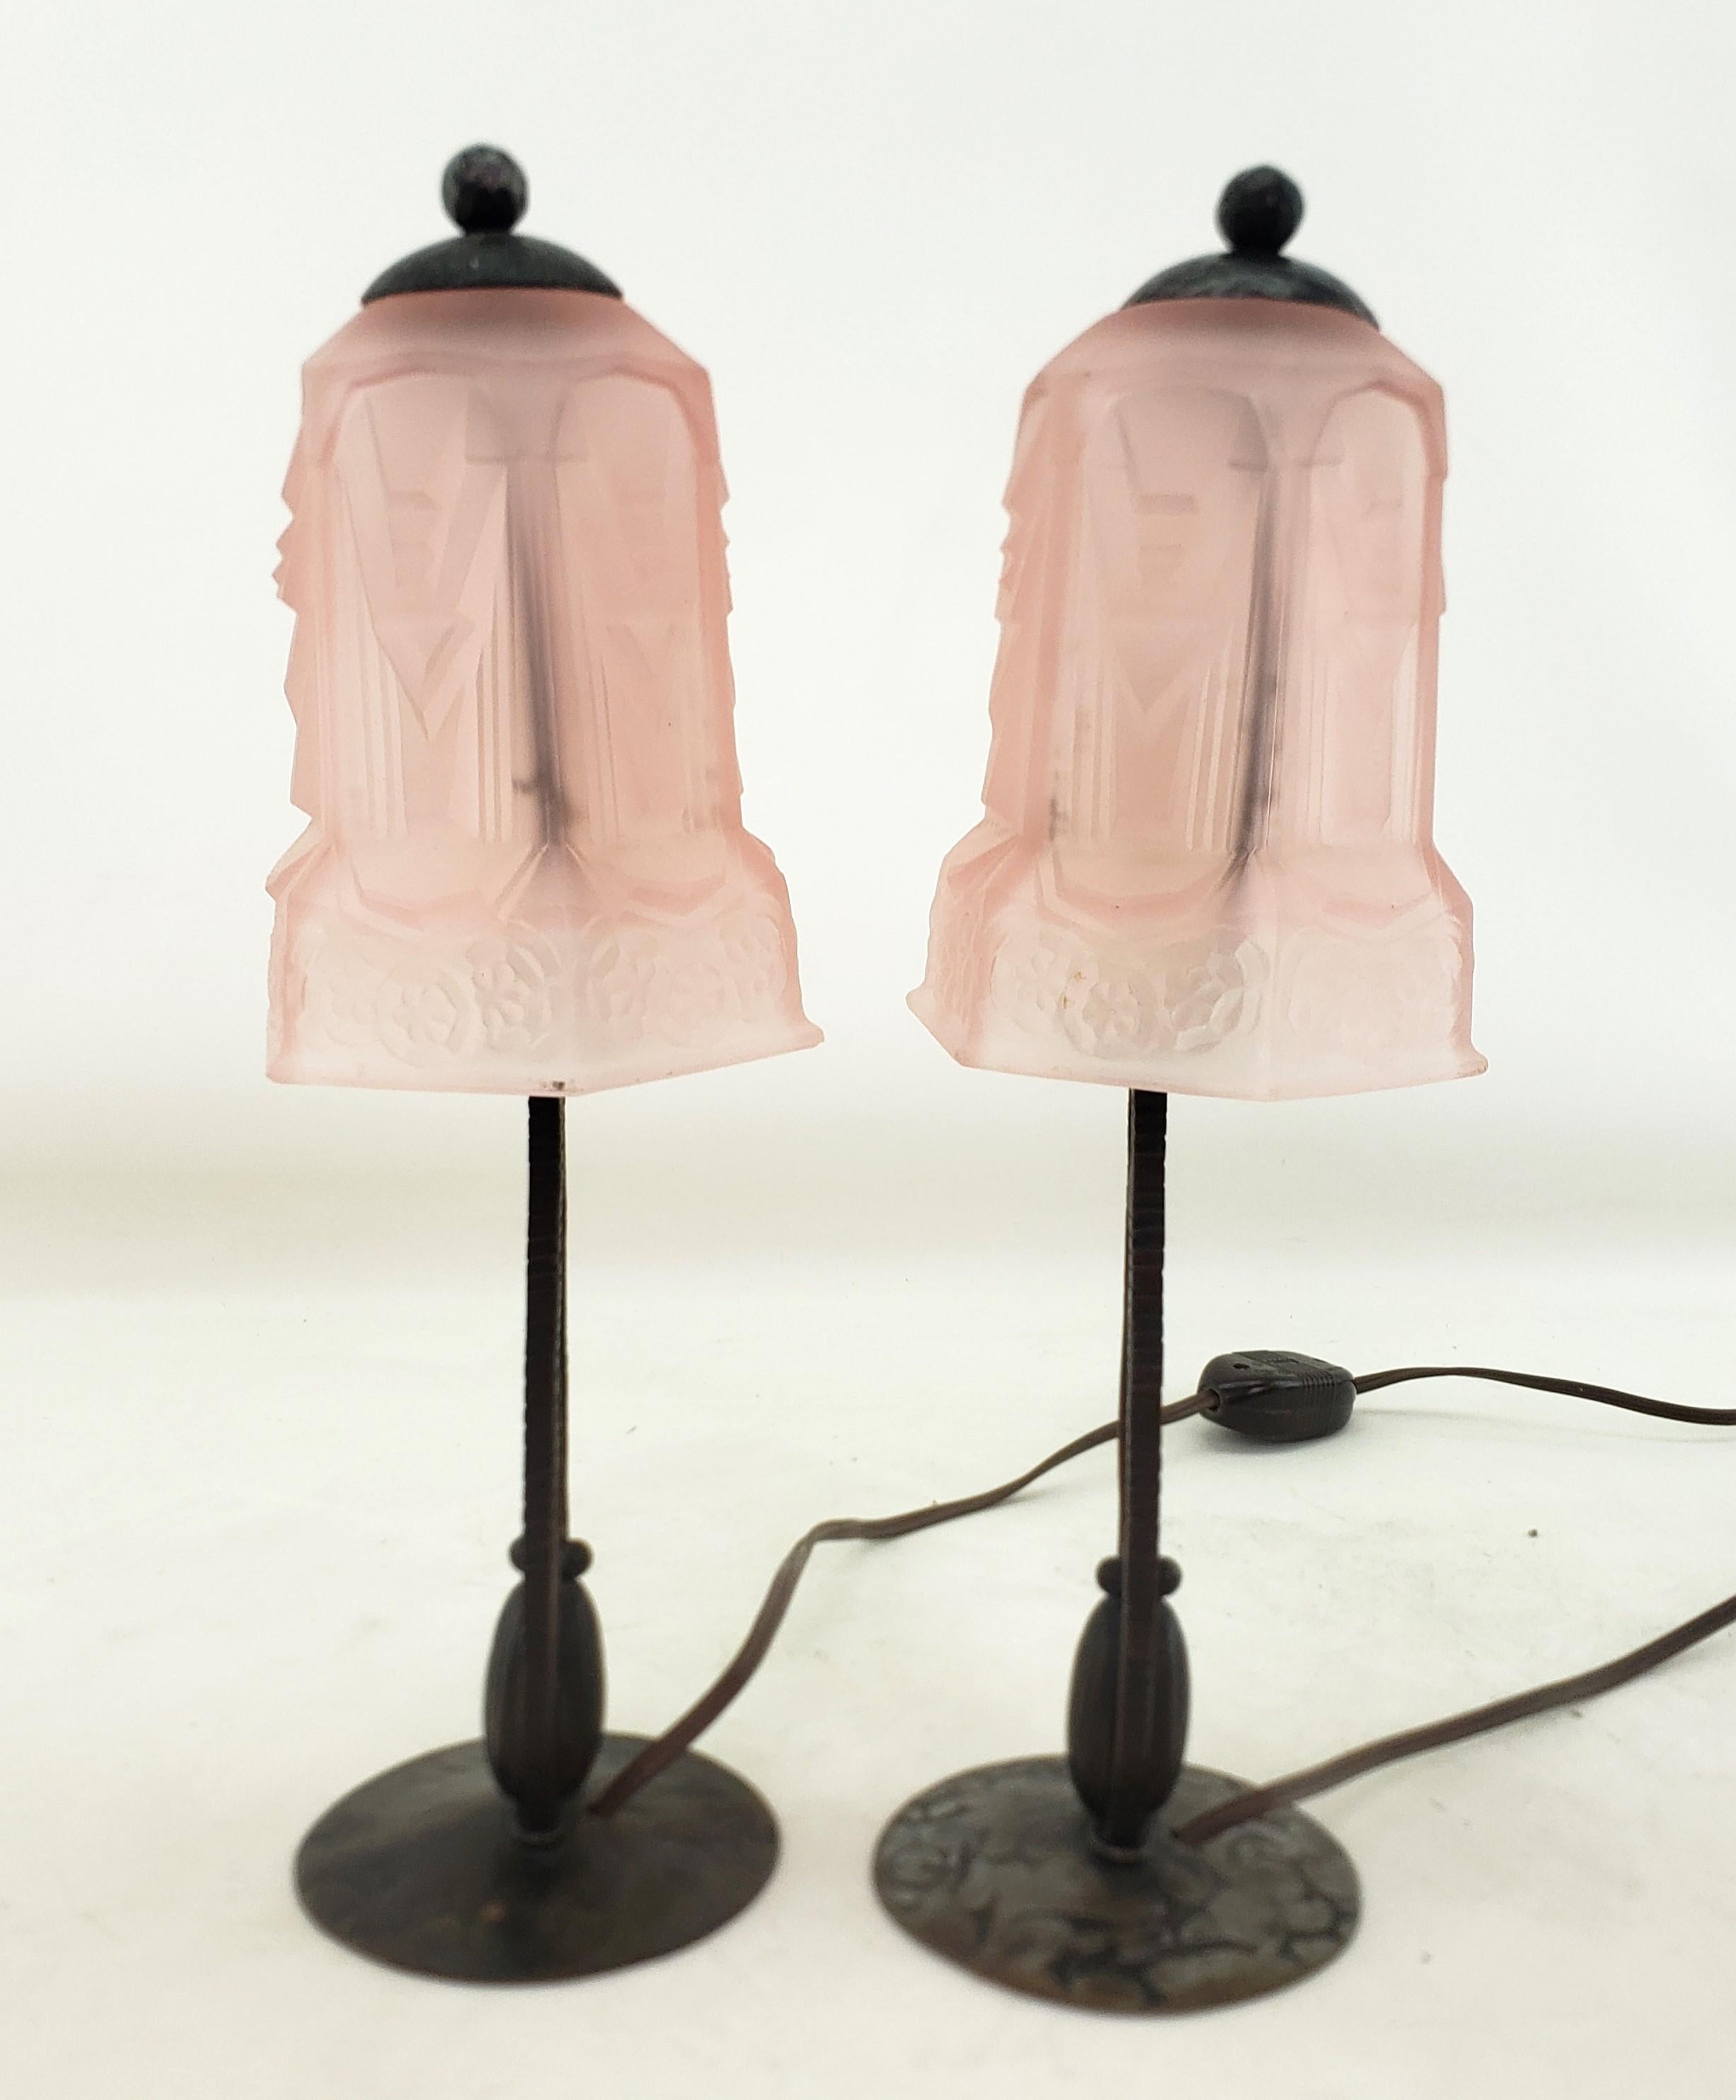 Pair of Antique Art Deco Bourdoir or Table Lamps with Frosted Pink Glass Shades For Sale 1